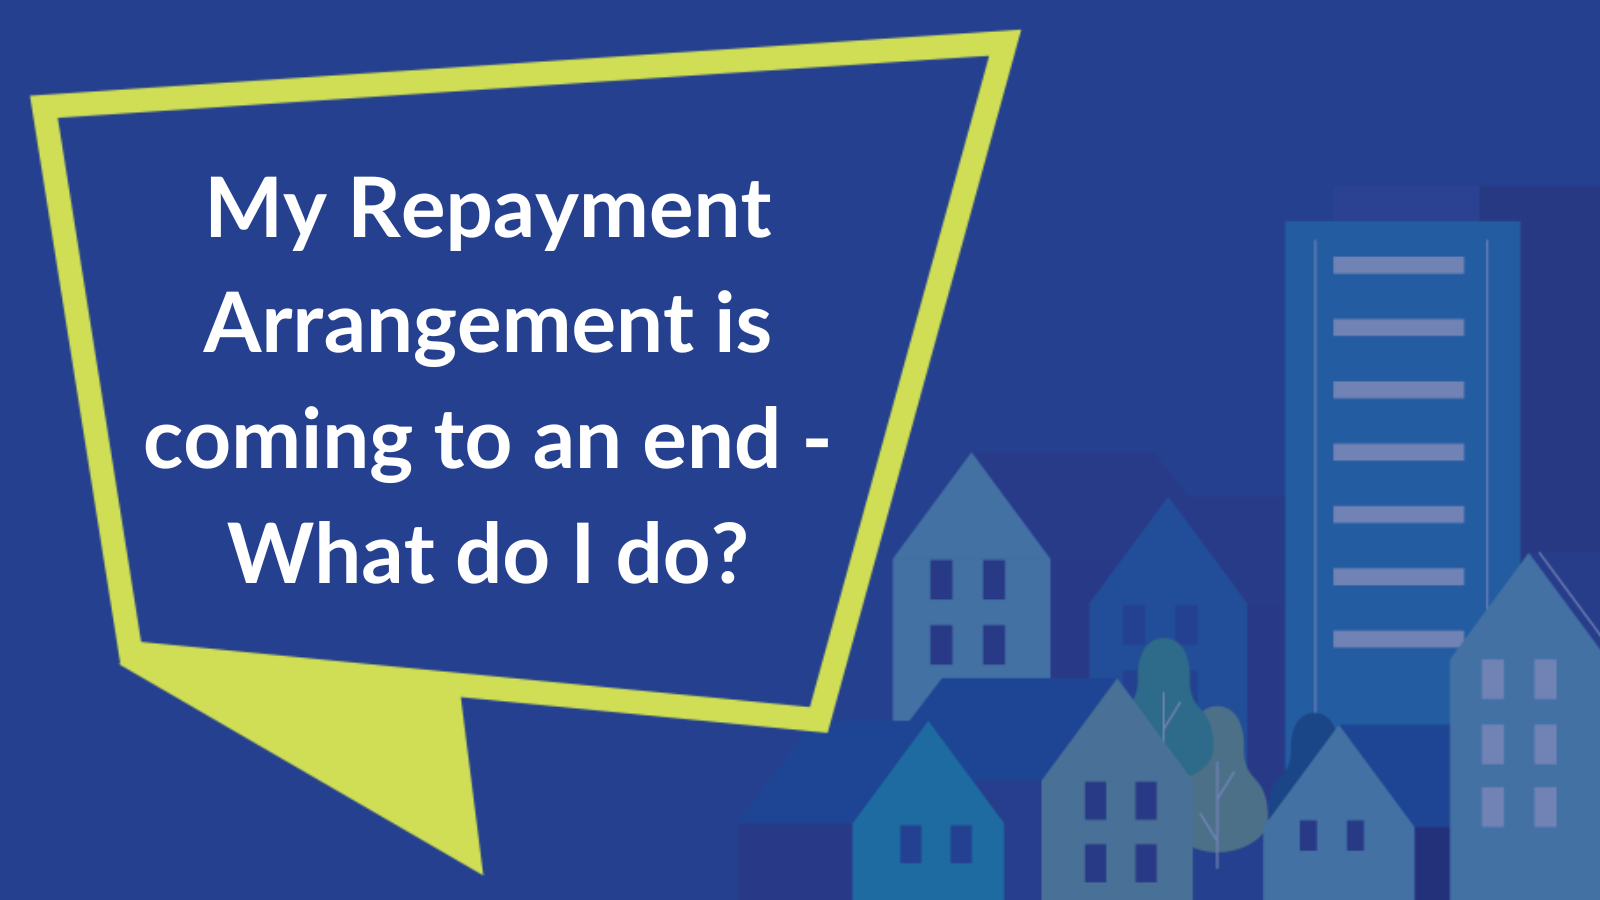 Cover image for blog post. Text reads "My Repayment Arrangement is coming to an end -What do I do?".